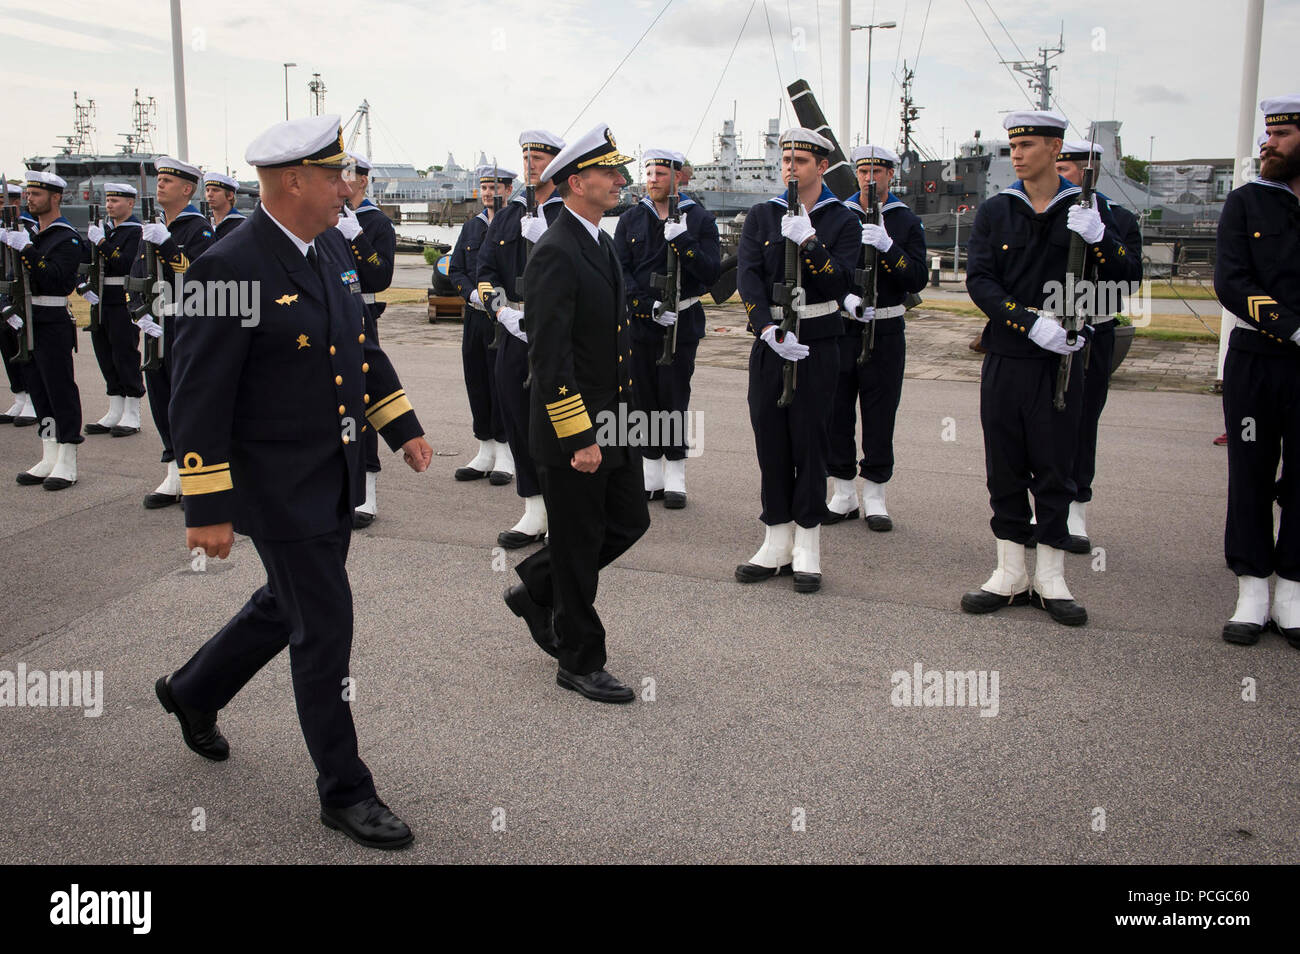 KARLSKRONA, Sweden (July 14, 2015) Chief of Naval Operations (CNO) Adm.  Jonathan Greenert and Rear Adm. Jan Thornqvist, chief of staff of the Royal Swedish  Navy, inspect the honor guard during a